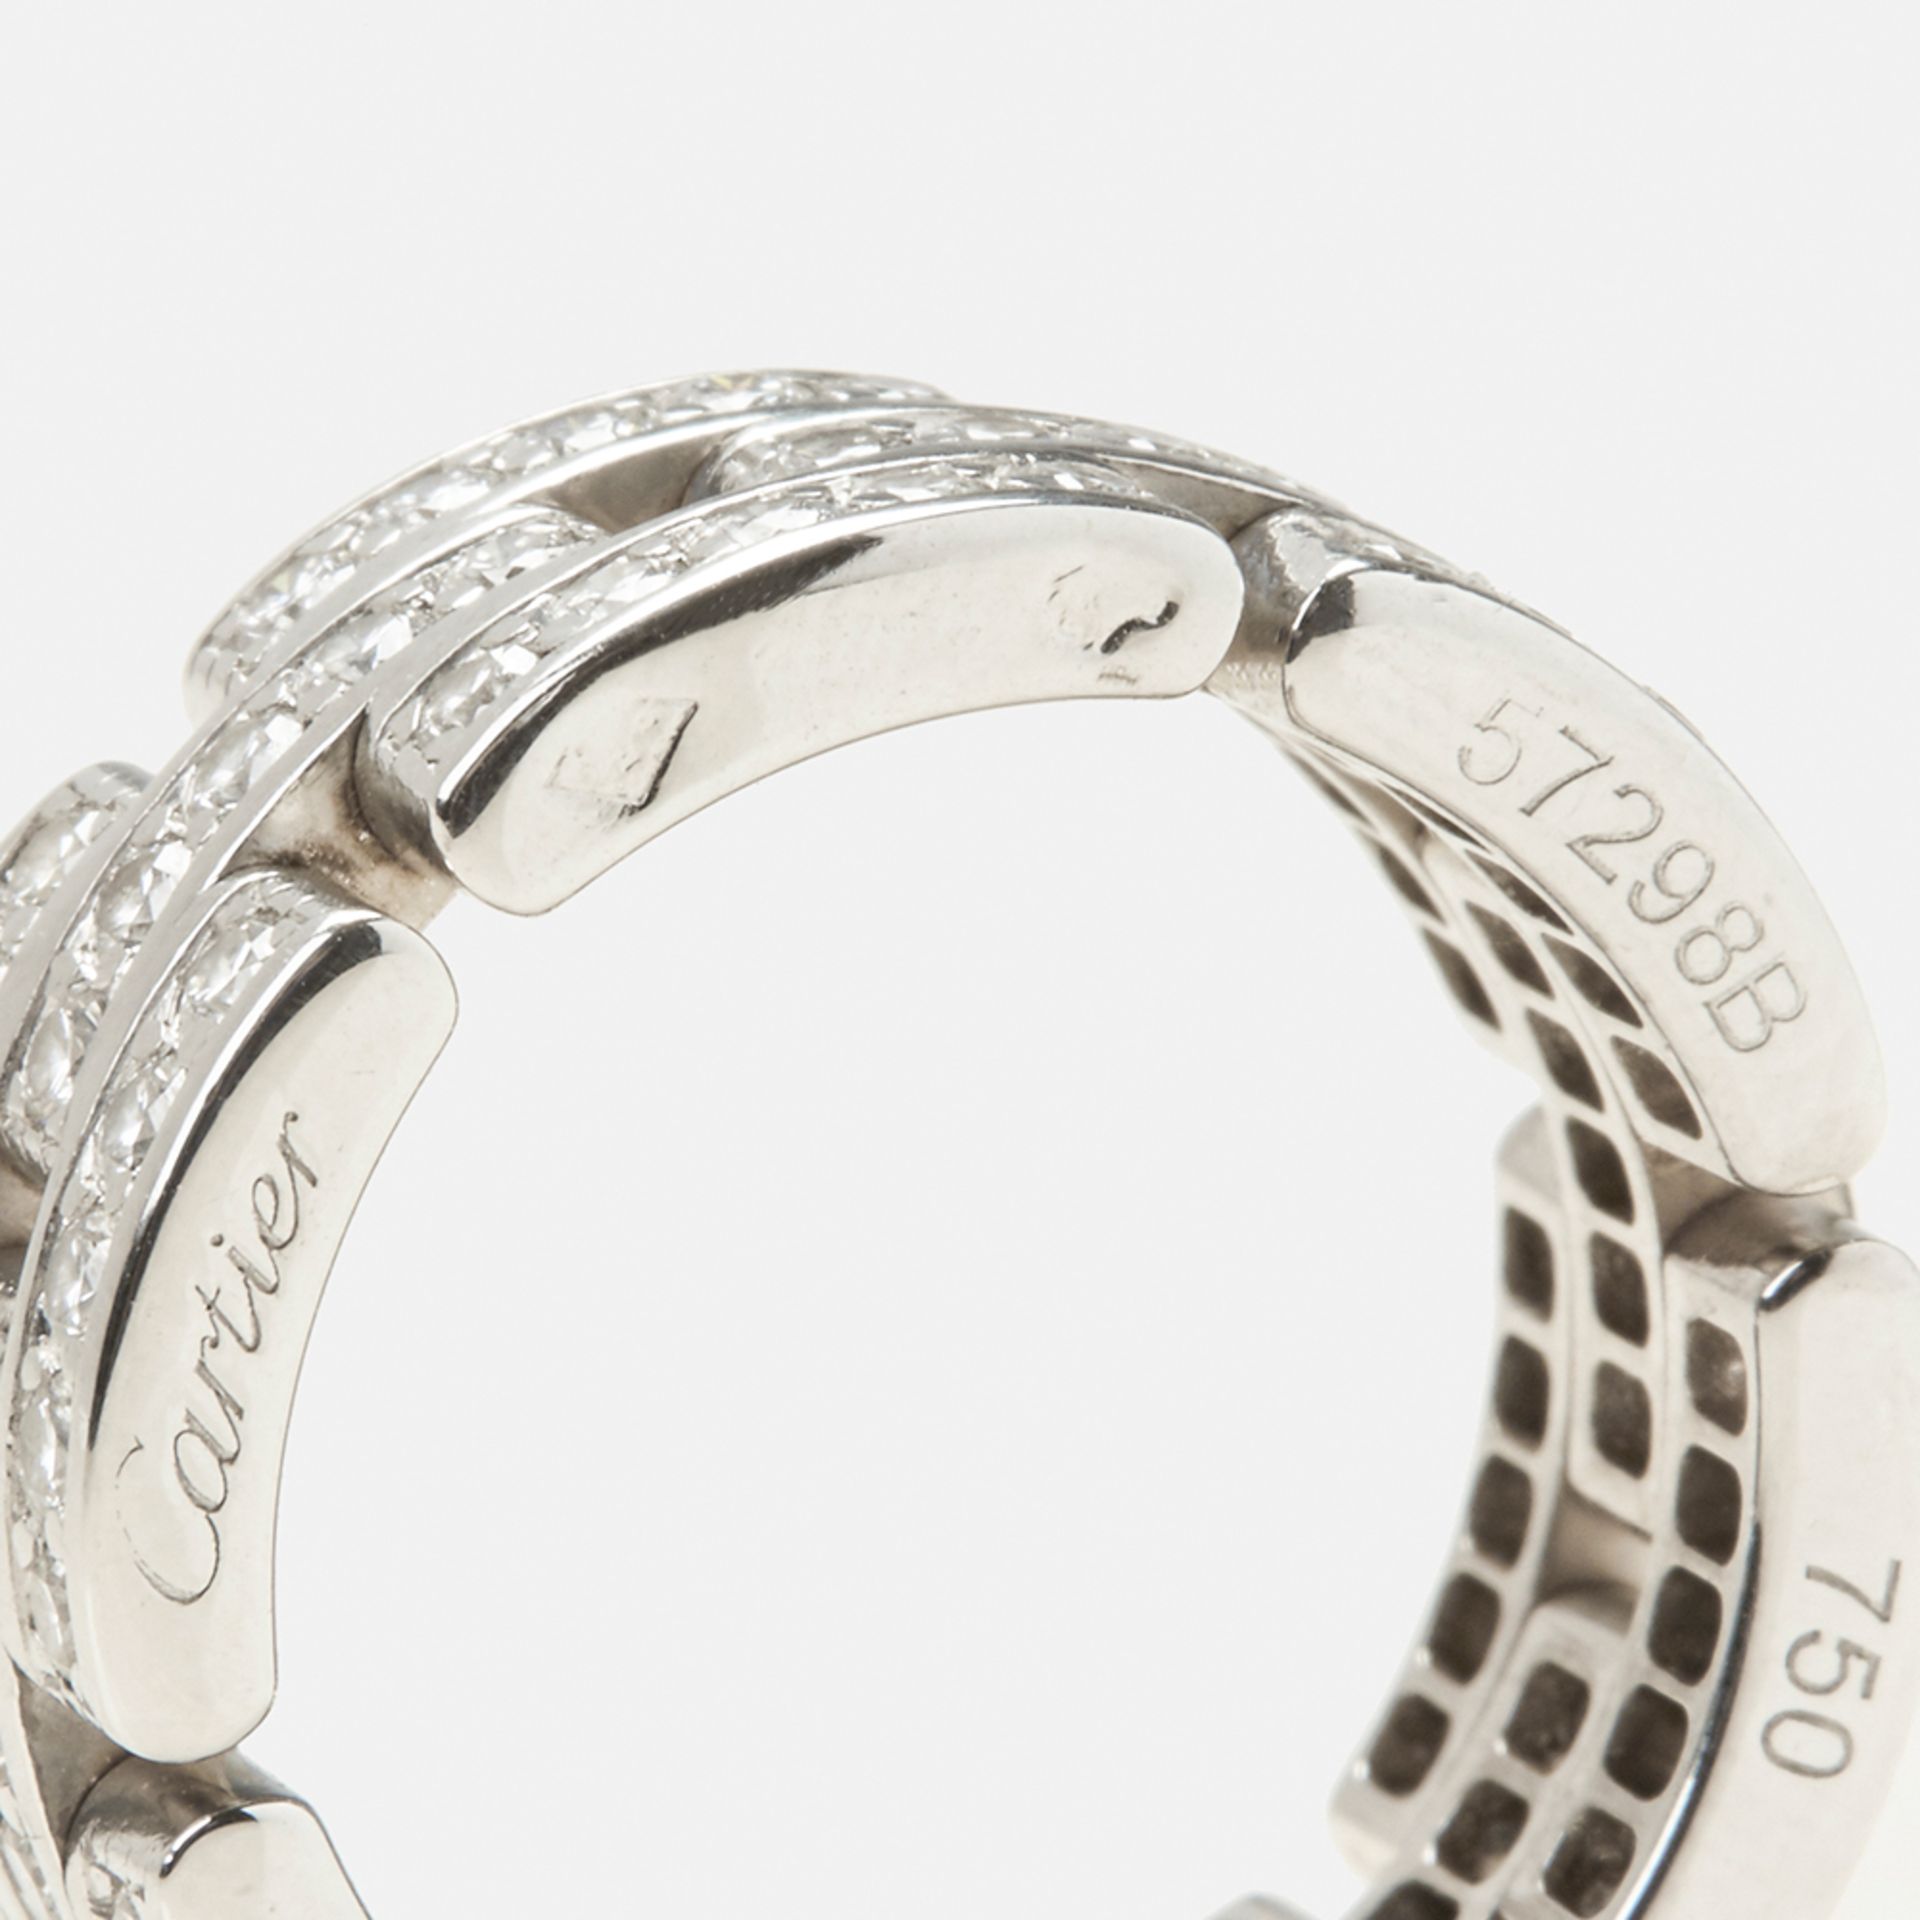 Cartier 18k White Gold Diamond Maillon Ring - Image 7 of 9